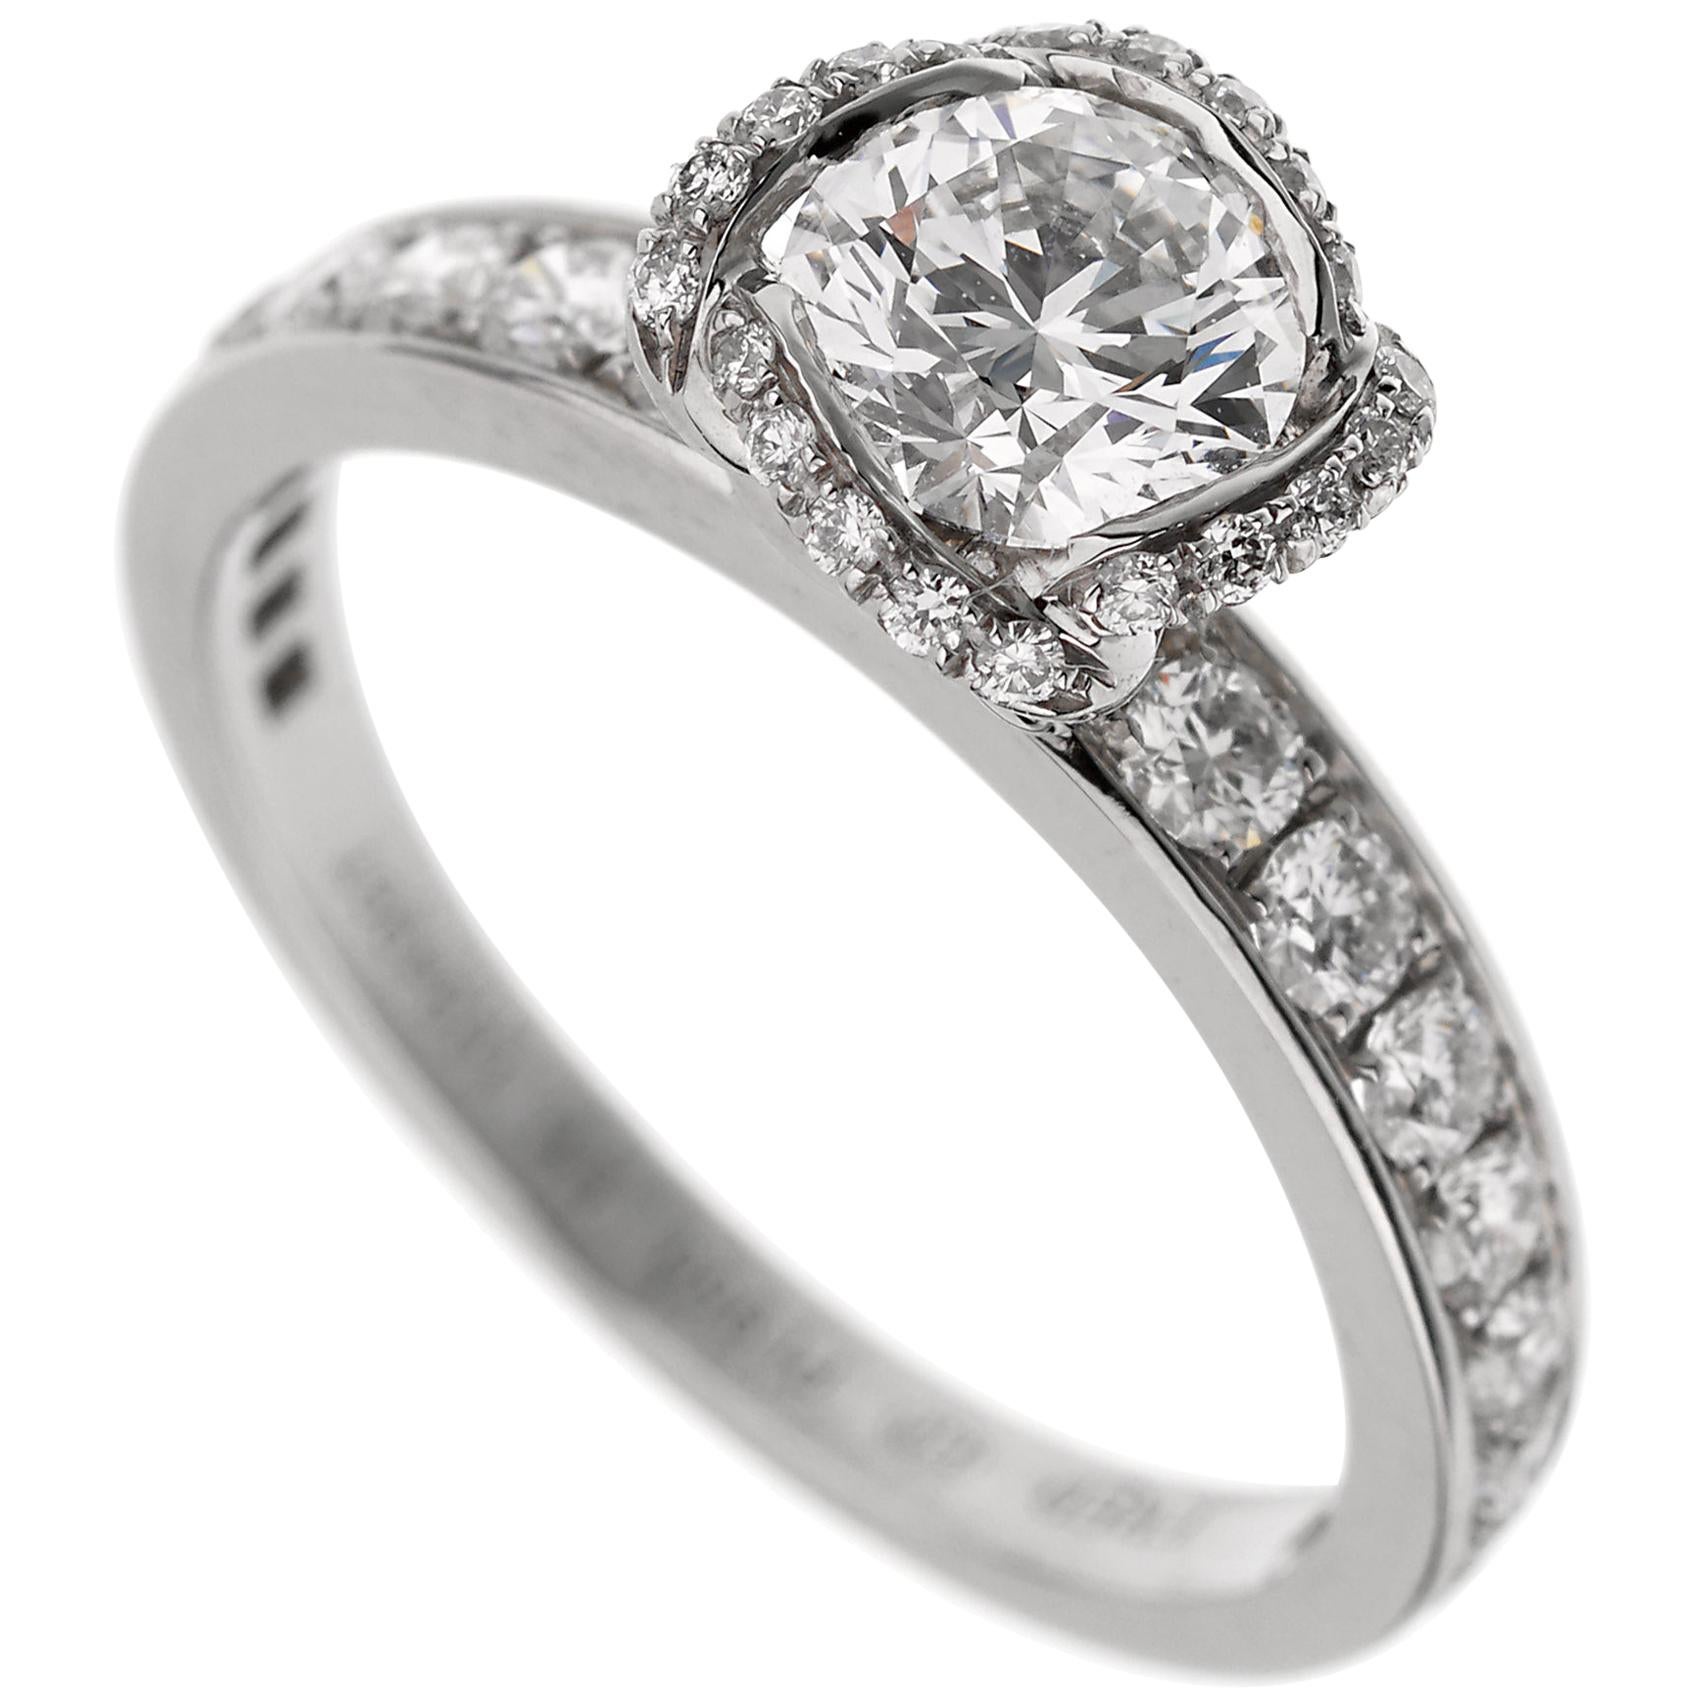 Fred of Paris GIA Certified Platinum Diamond Engagement Ring 1.23 Carat For Sale